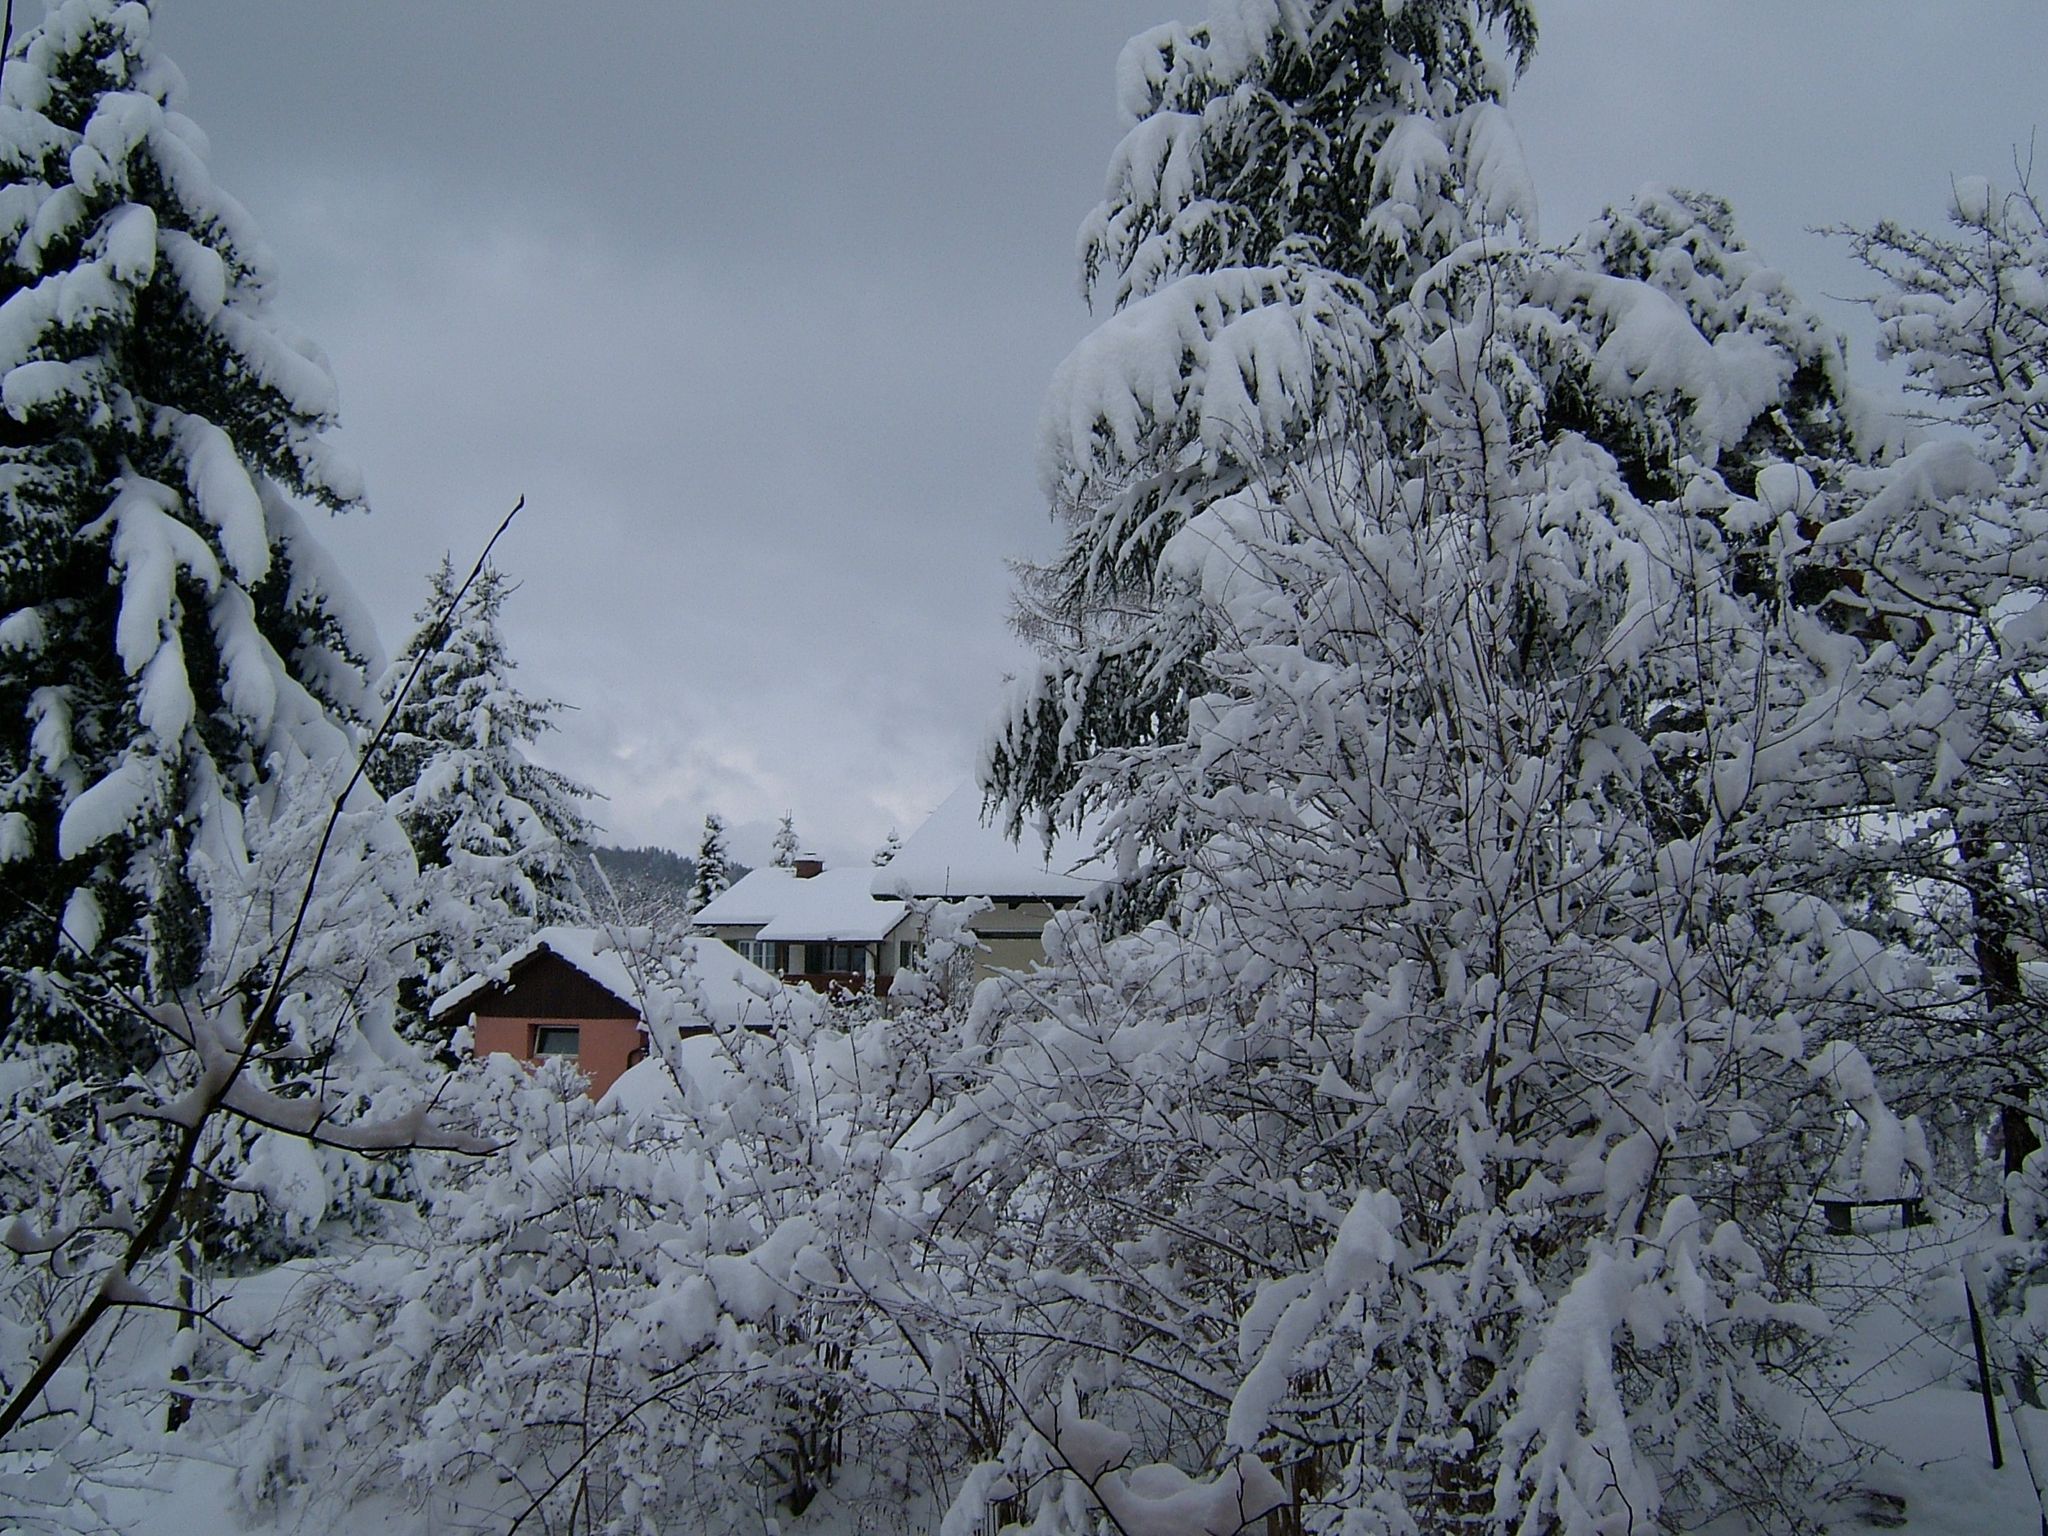 Photo 1 of 23 from the album Winter in Embrach.